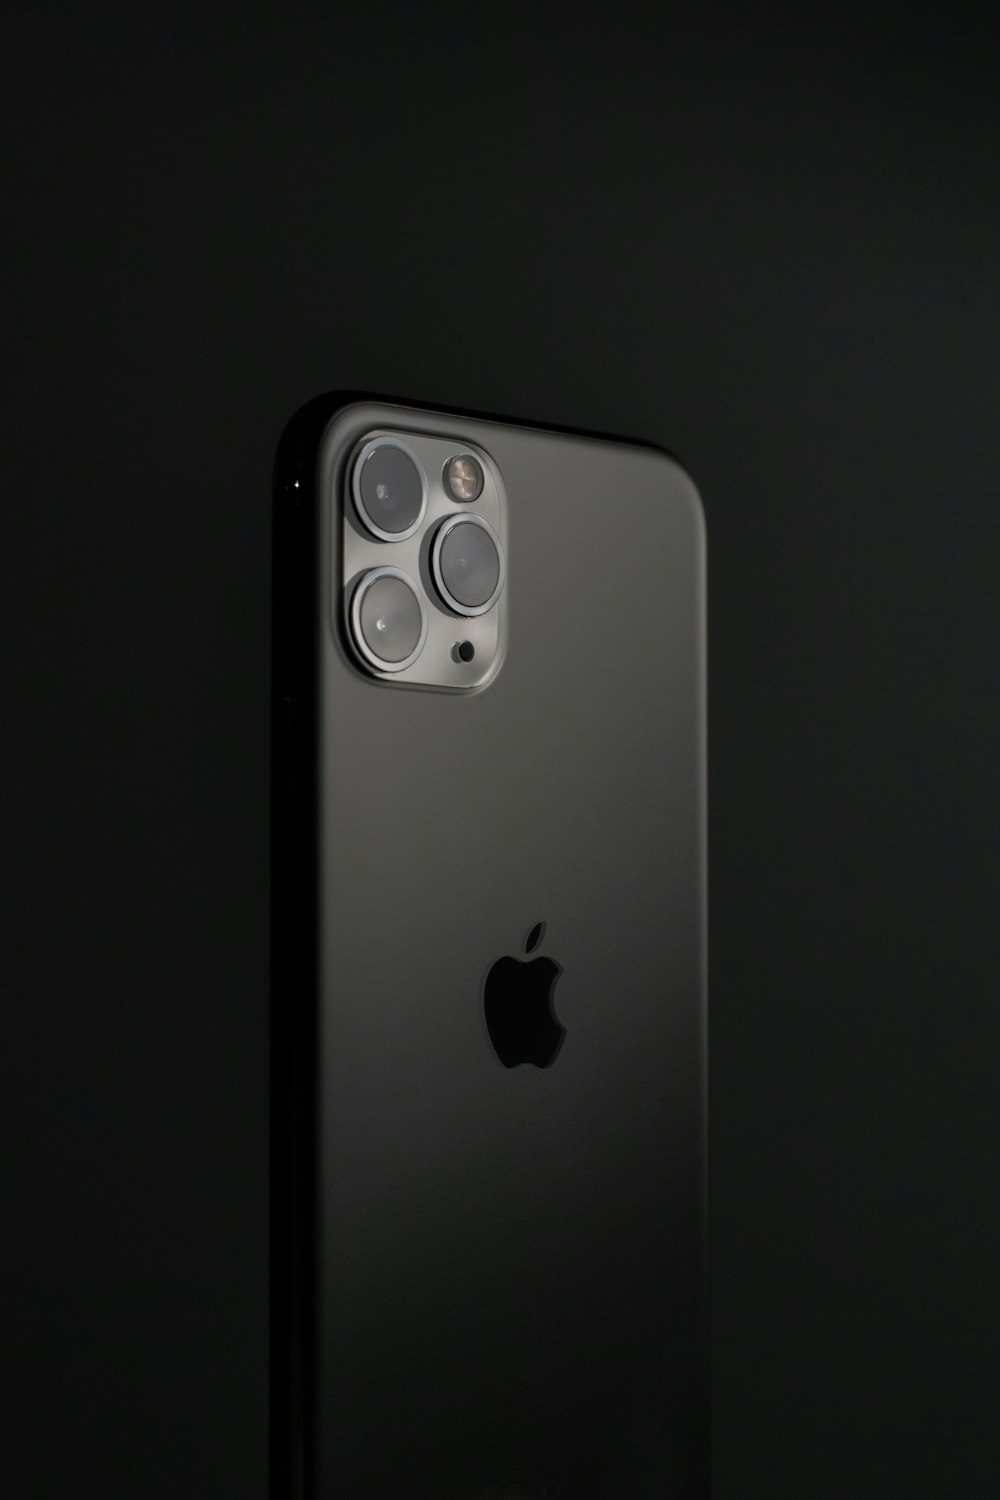 silver iphone 6 on black surface